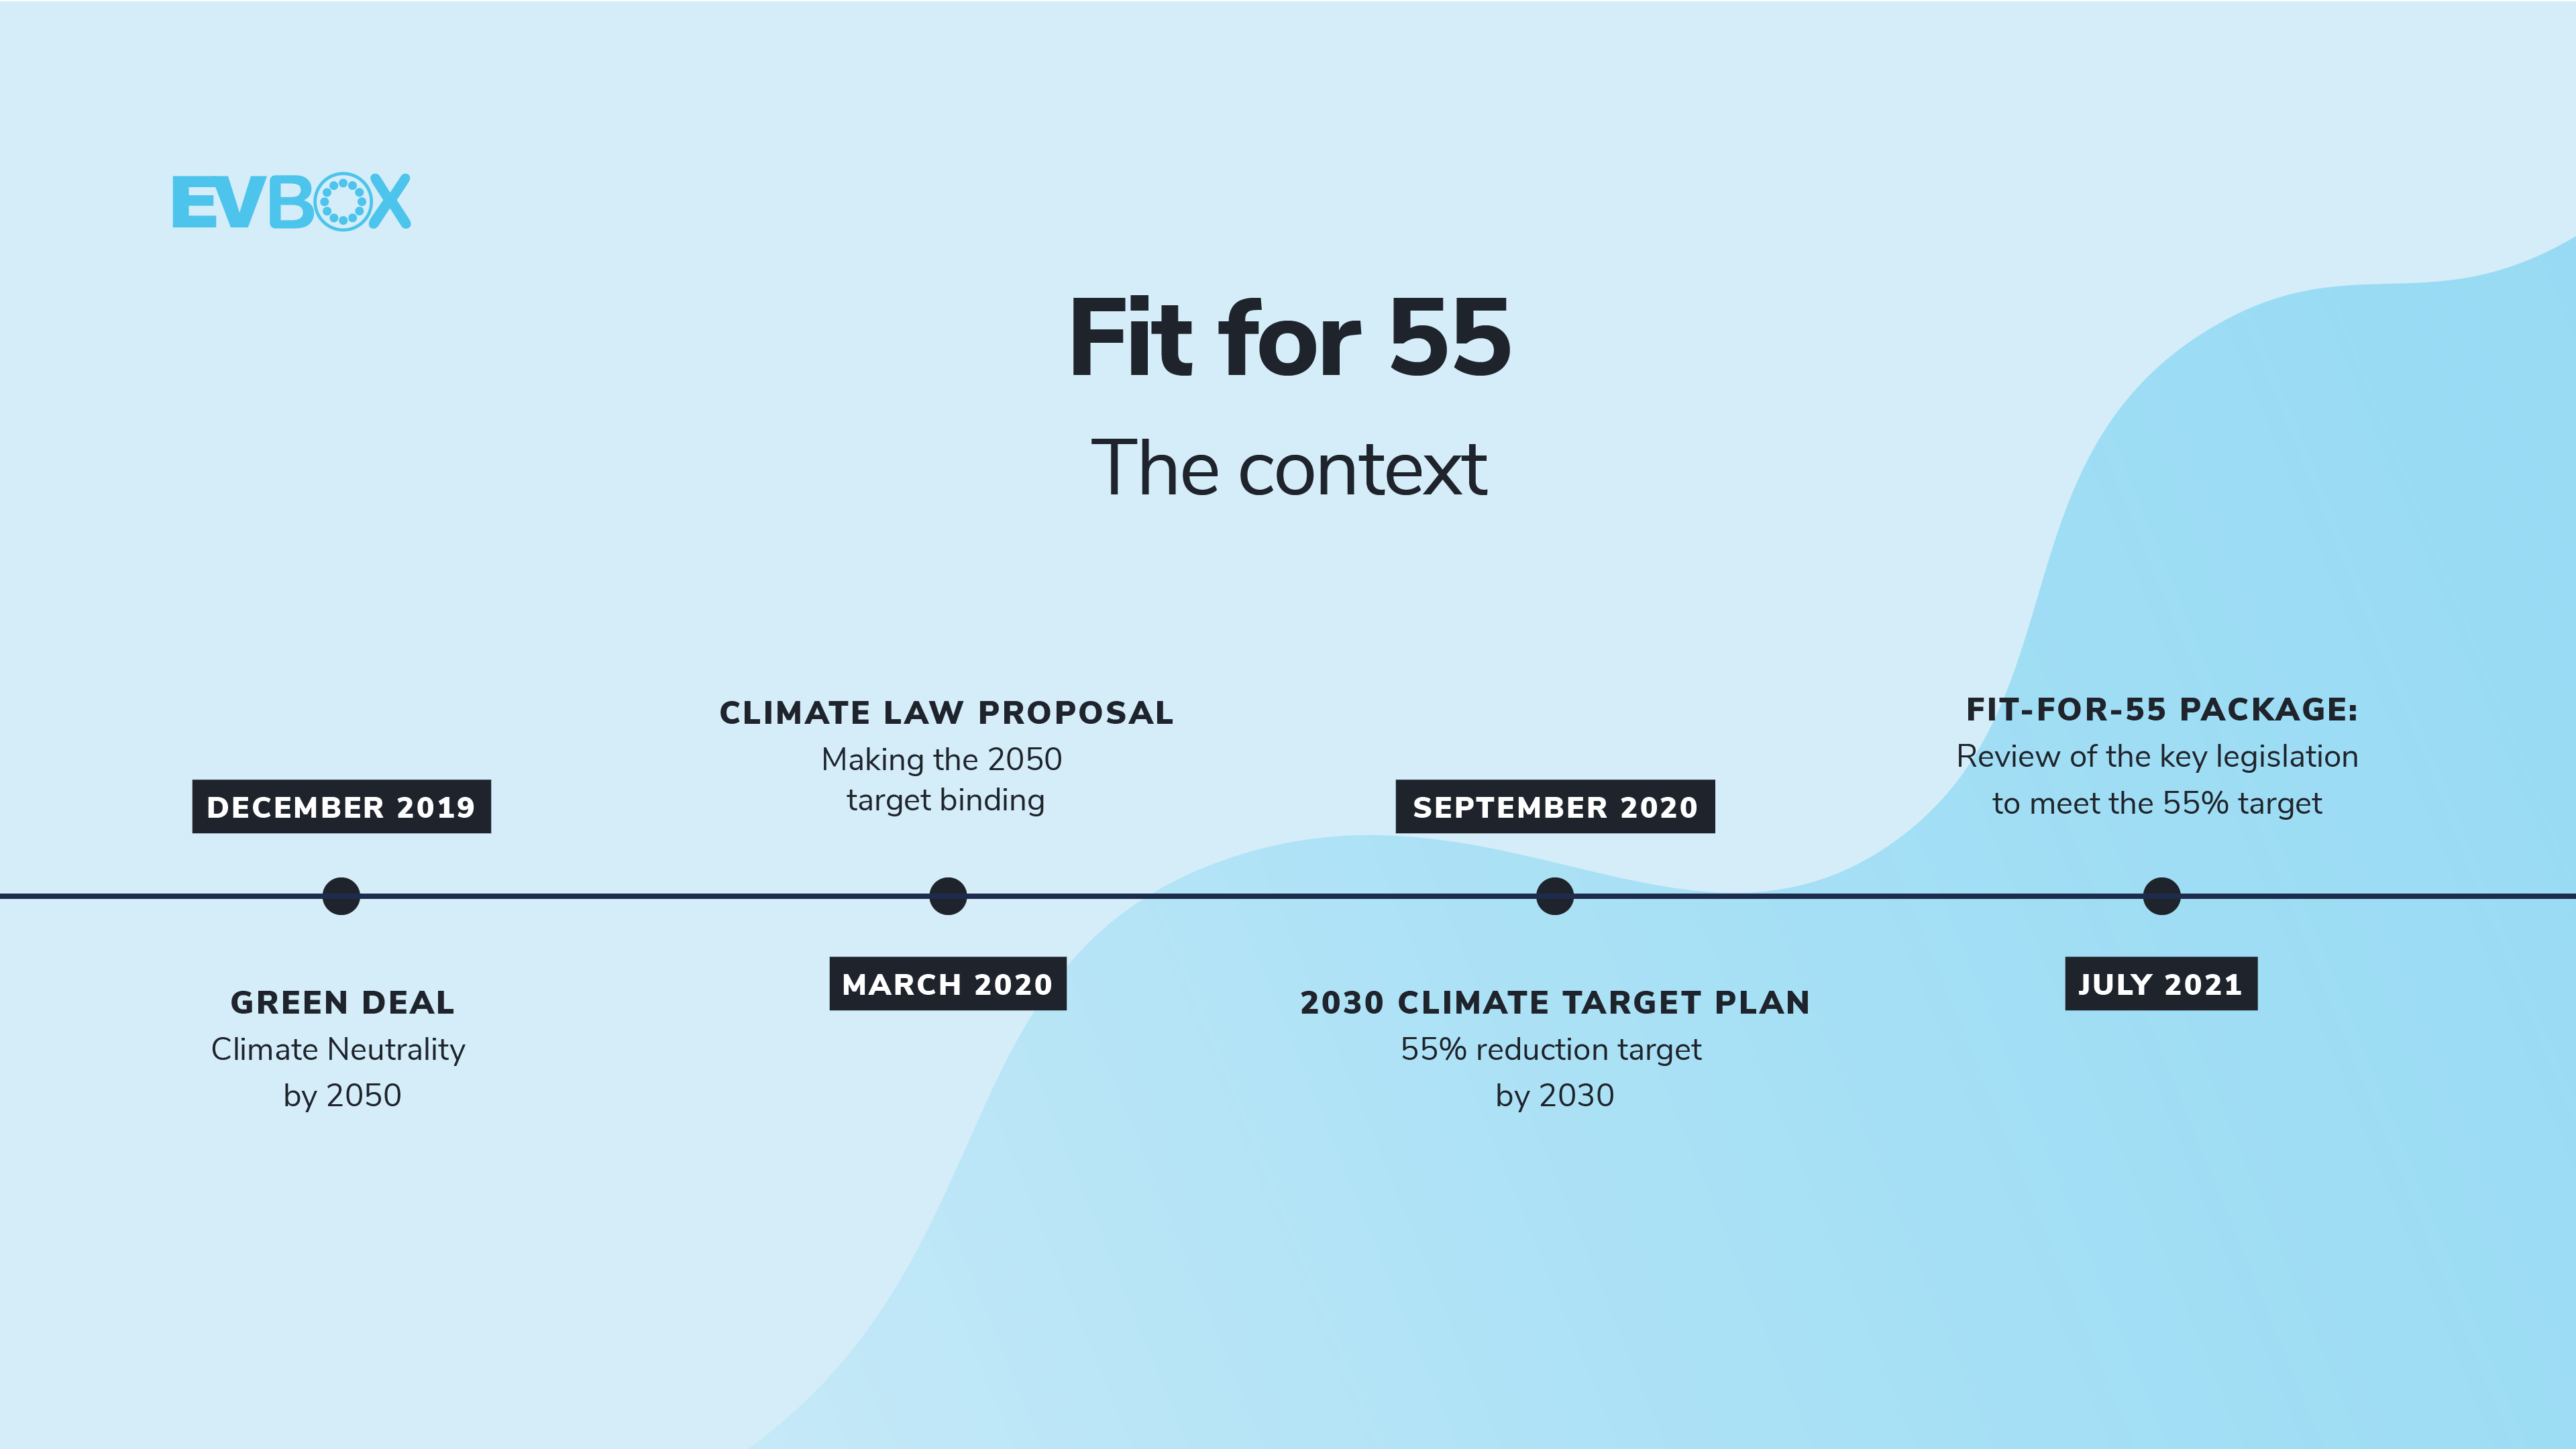 A timeline showing the events leading up to the Fit-for-55 Package. December 2019: Green Deal - Climate neutrality by 2050, March 2020: Climate law proposal - Making the 2050 target binding, September 2020: 2030 Climate Target Plan - 55% reduction target by 2030, July 2021: Fit-for-55 Package - Review of the key legislation to meet the 55% target.